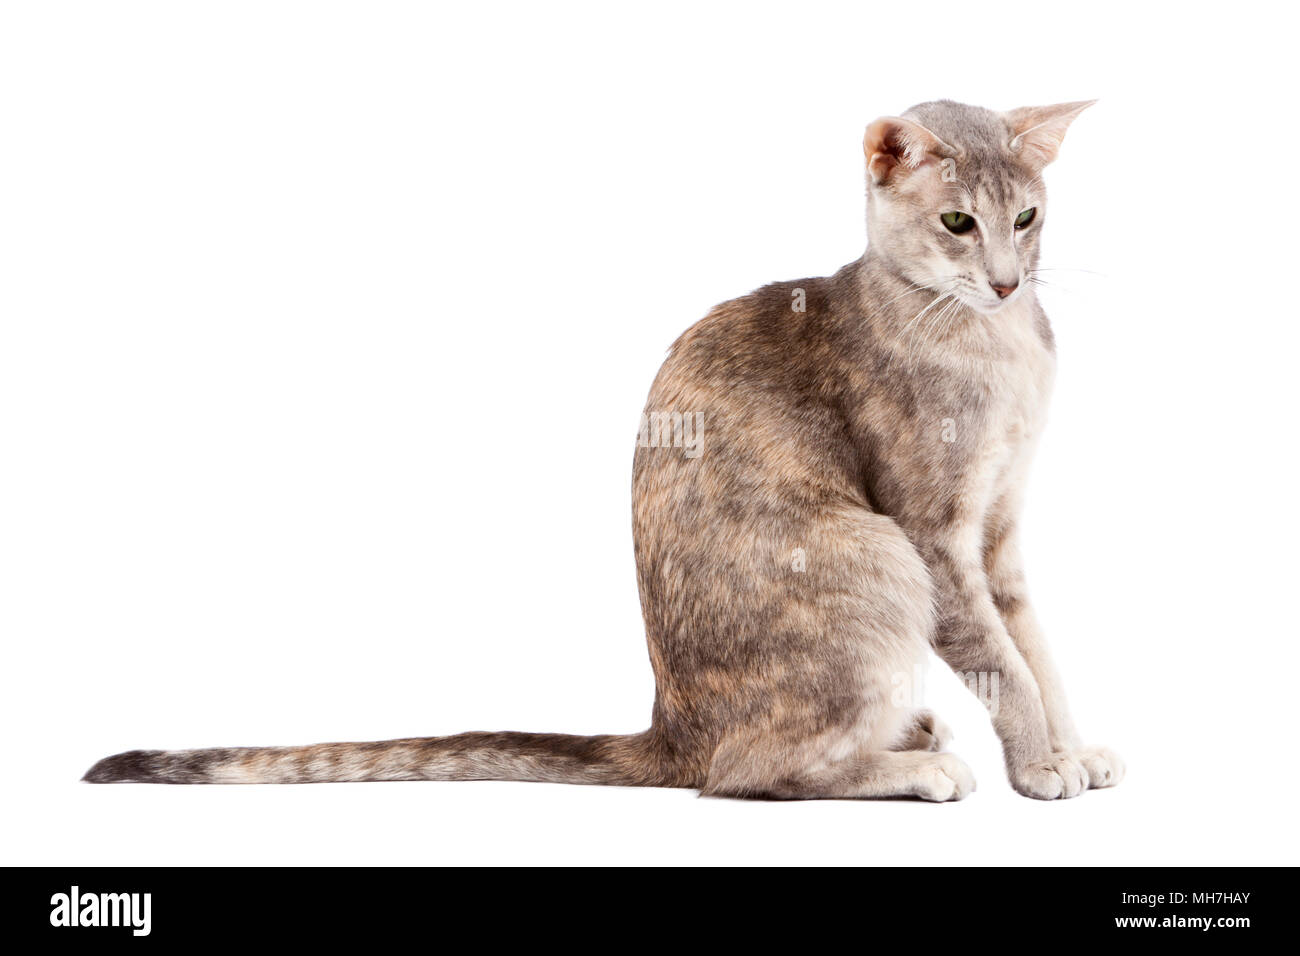 Grey tabby oriental shorthaired cat with green eyes on white background Stock Photo